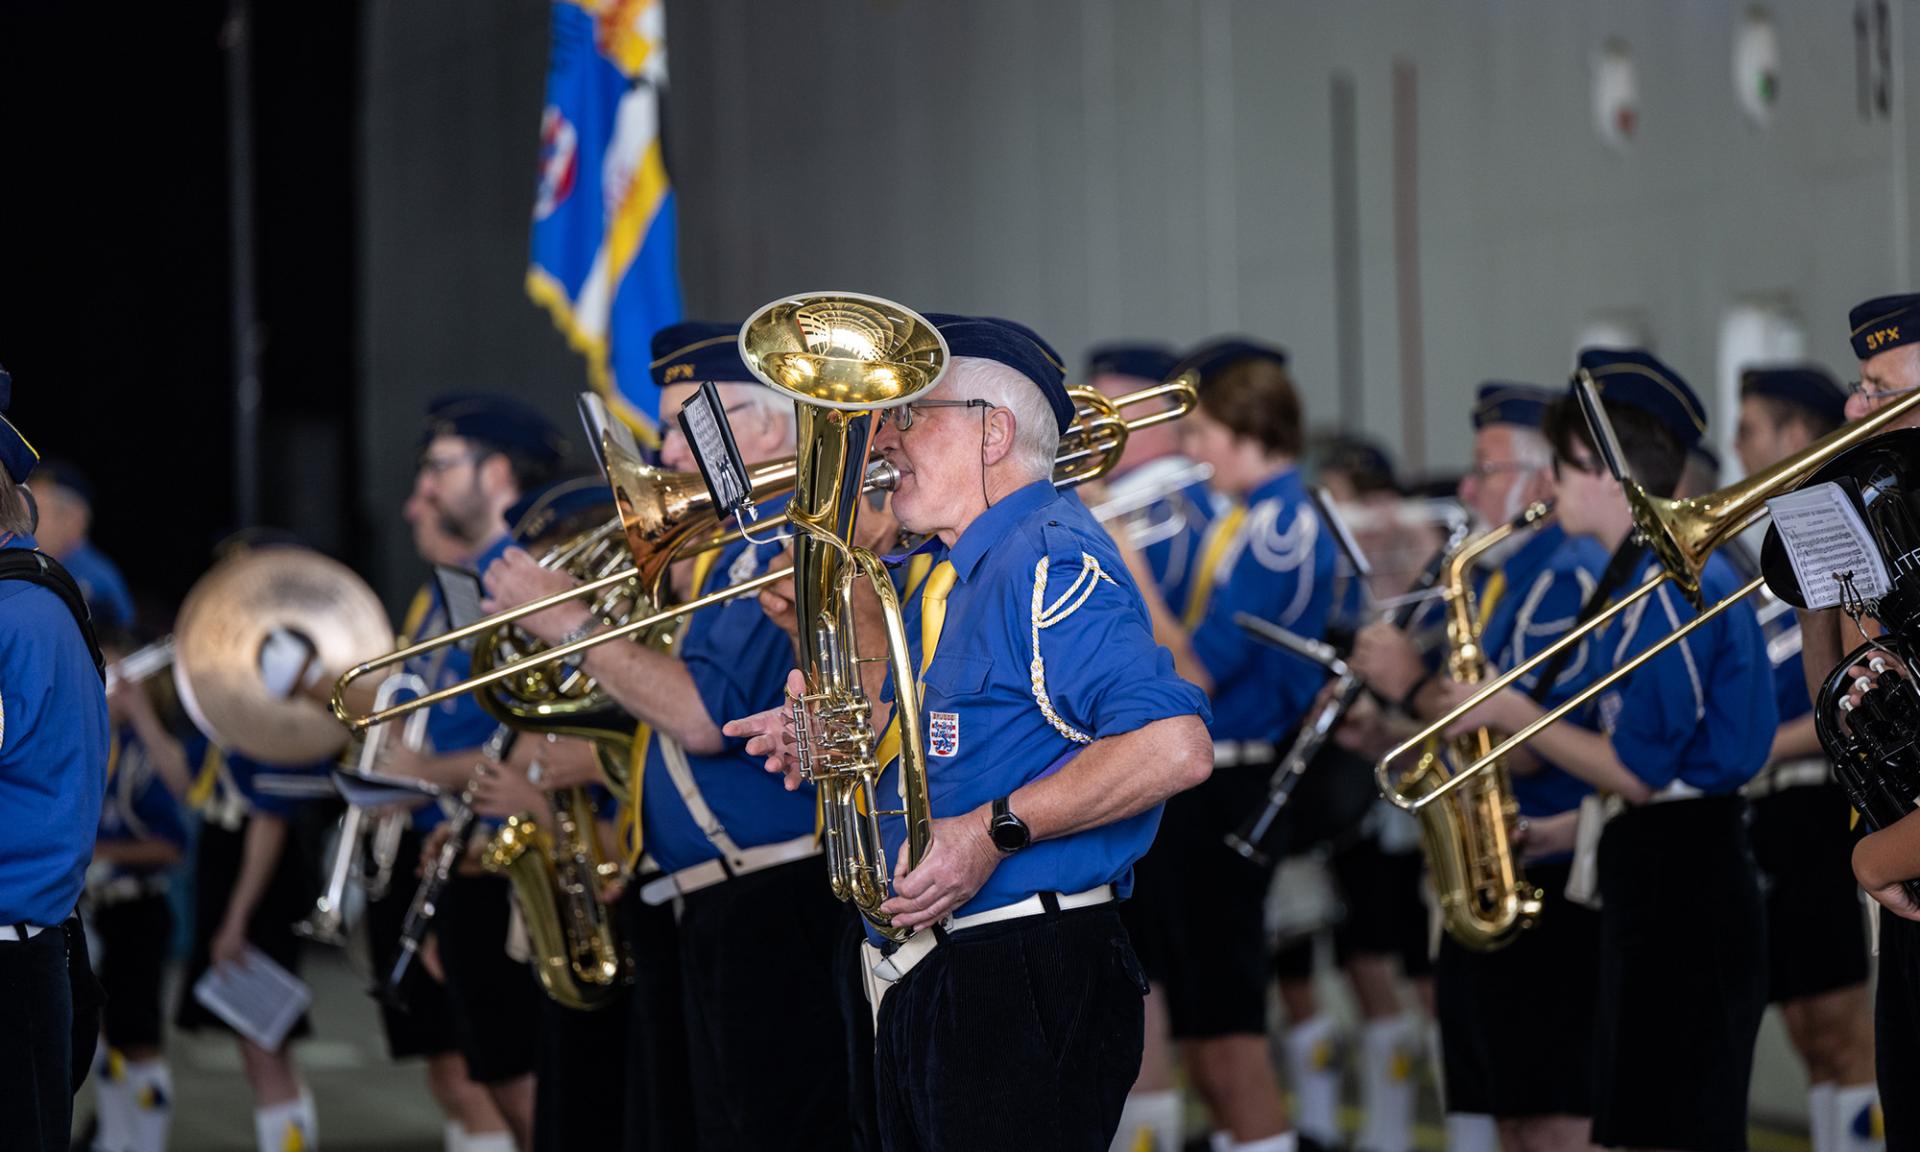 Music corps playing during the naming of the Baltic Enabler